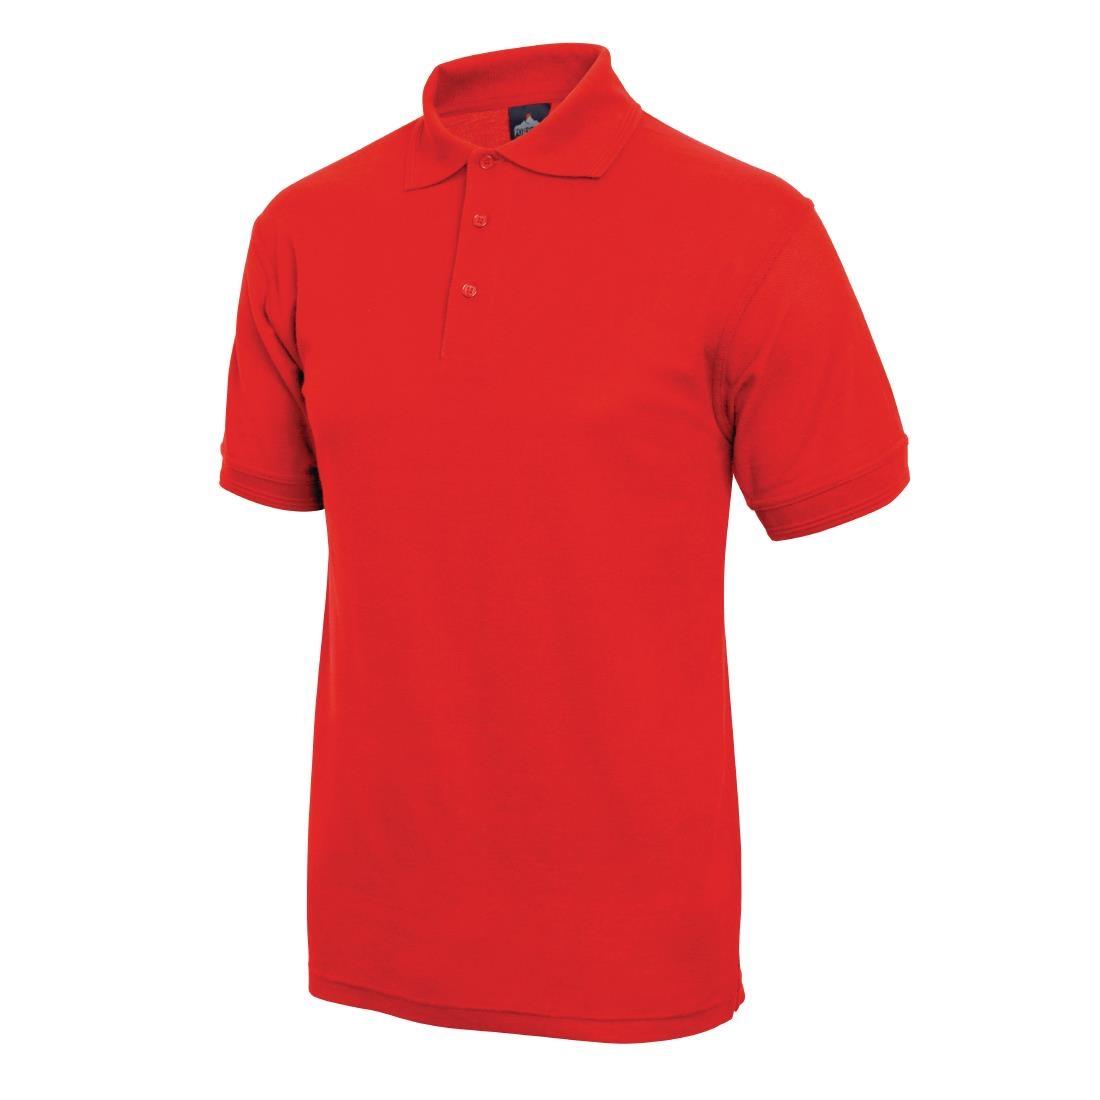 Unisex Polo Shirt Red S - A762-S  - 2